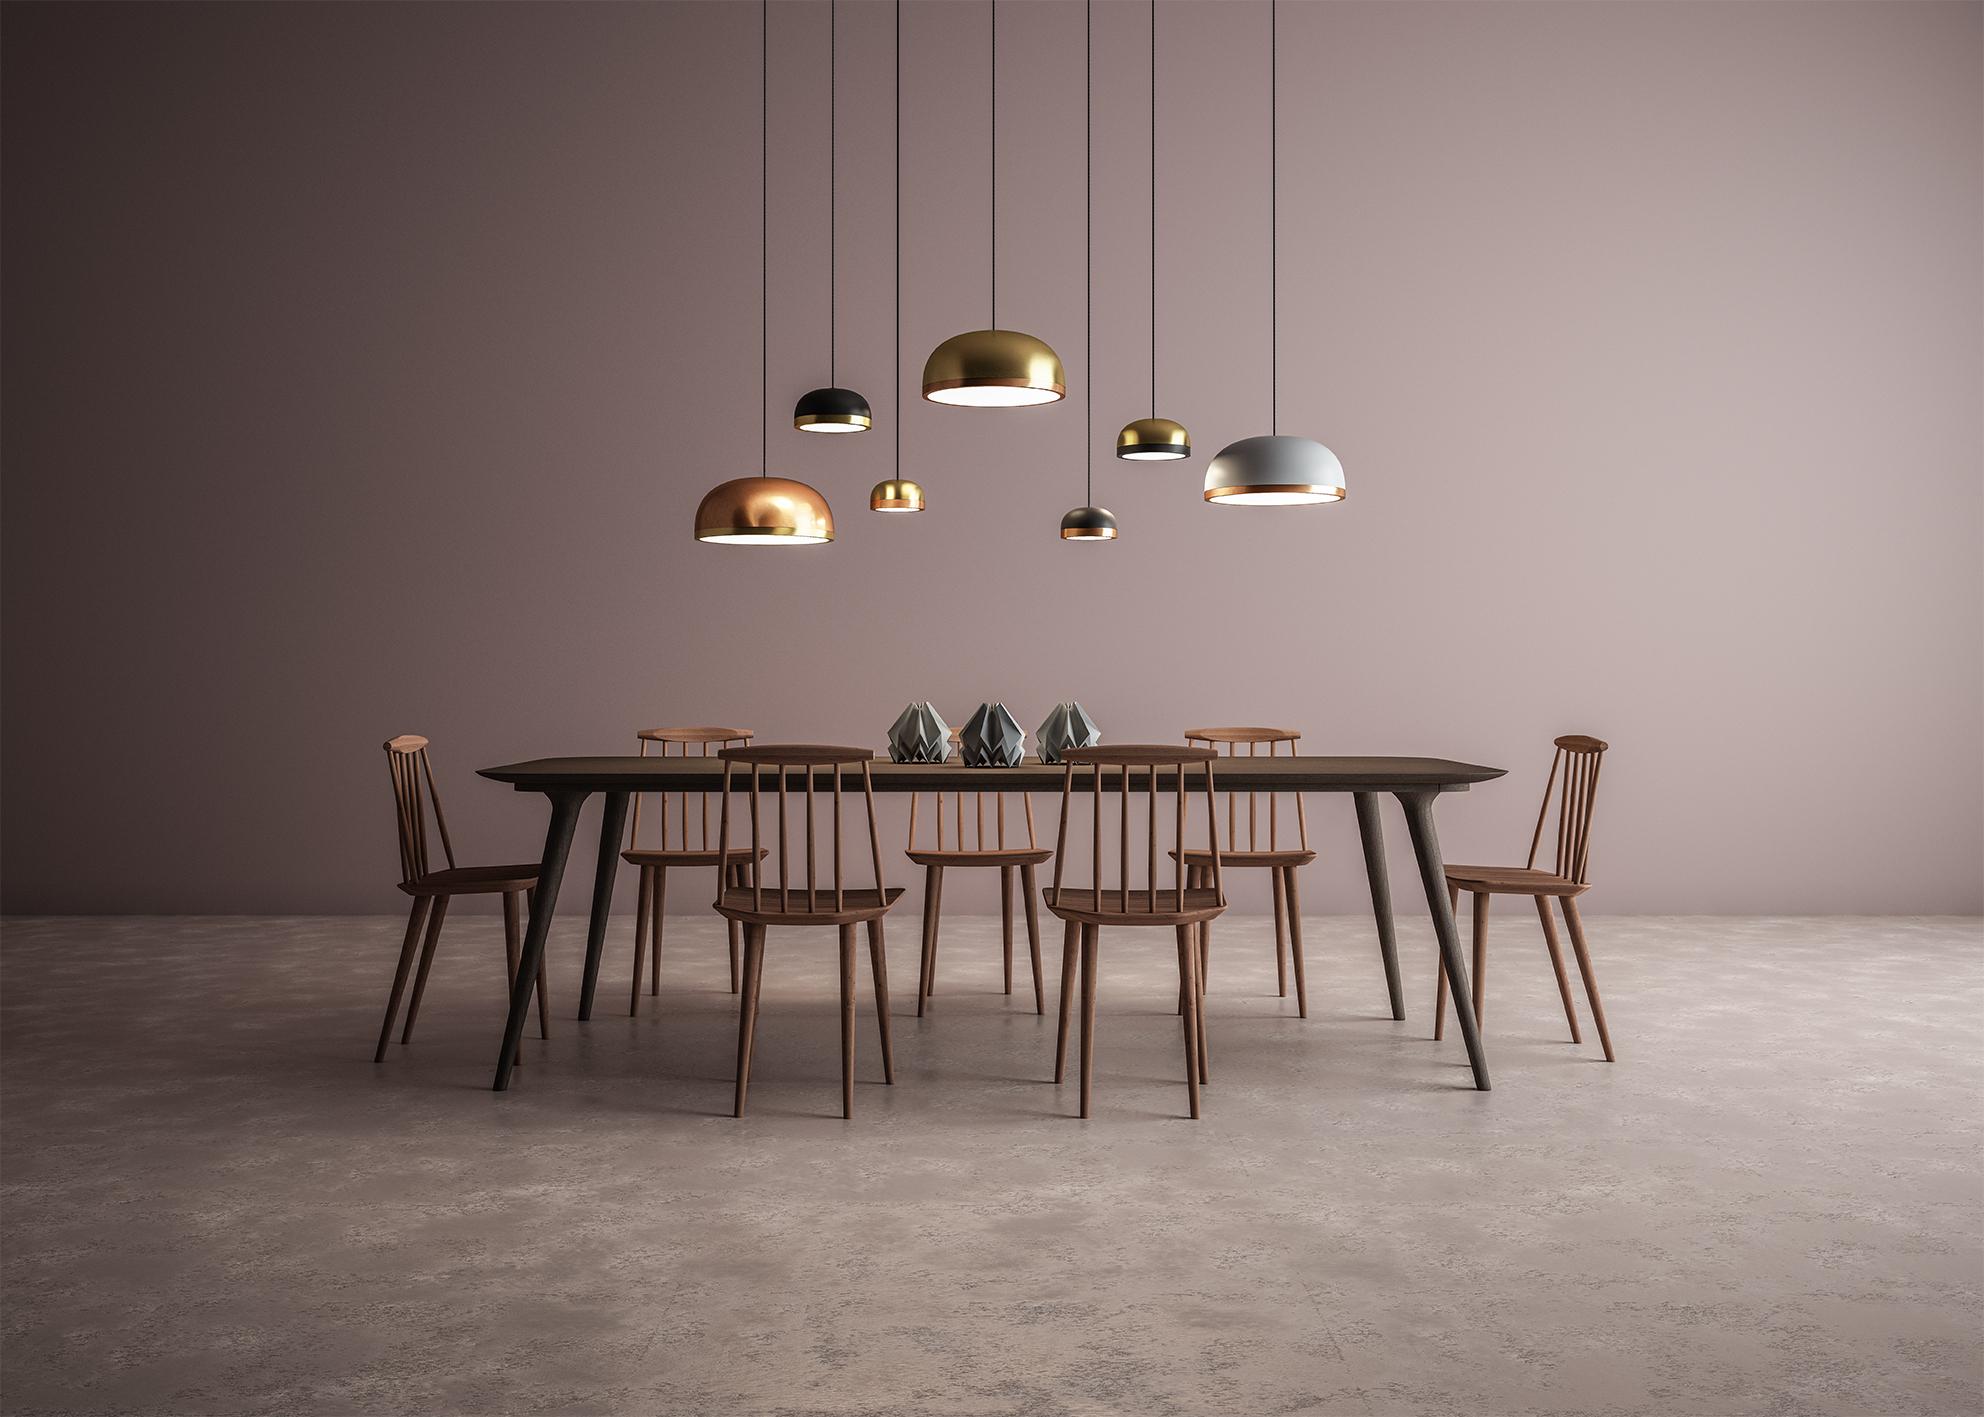 Pendant Lamp Molly 556.23 by TOOY
Designer: Corrado Dotti

Model shown: Brass ring + Pewter dome
Dimensions: H. 17 x D. 20 cm
Source light: 1 x LED 220/240V , 1200 lumens,  12W Compliant with USA electric system
Adjustable direct light